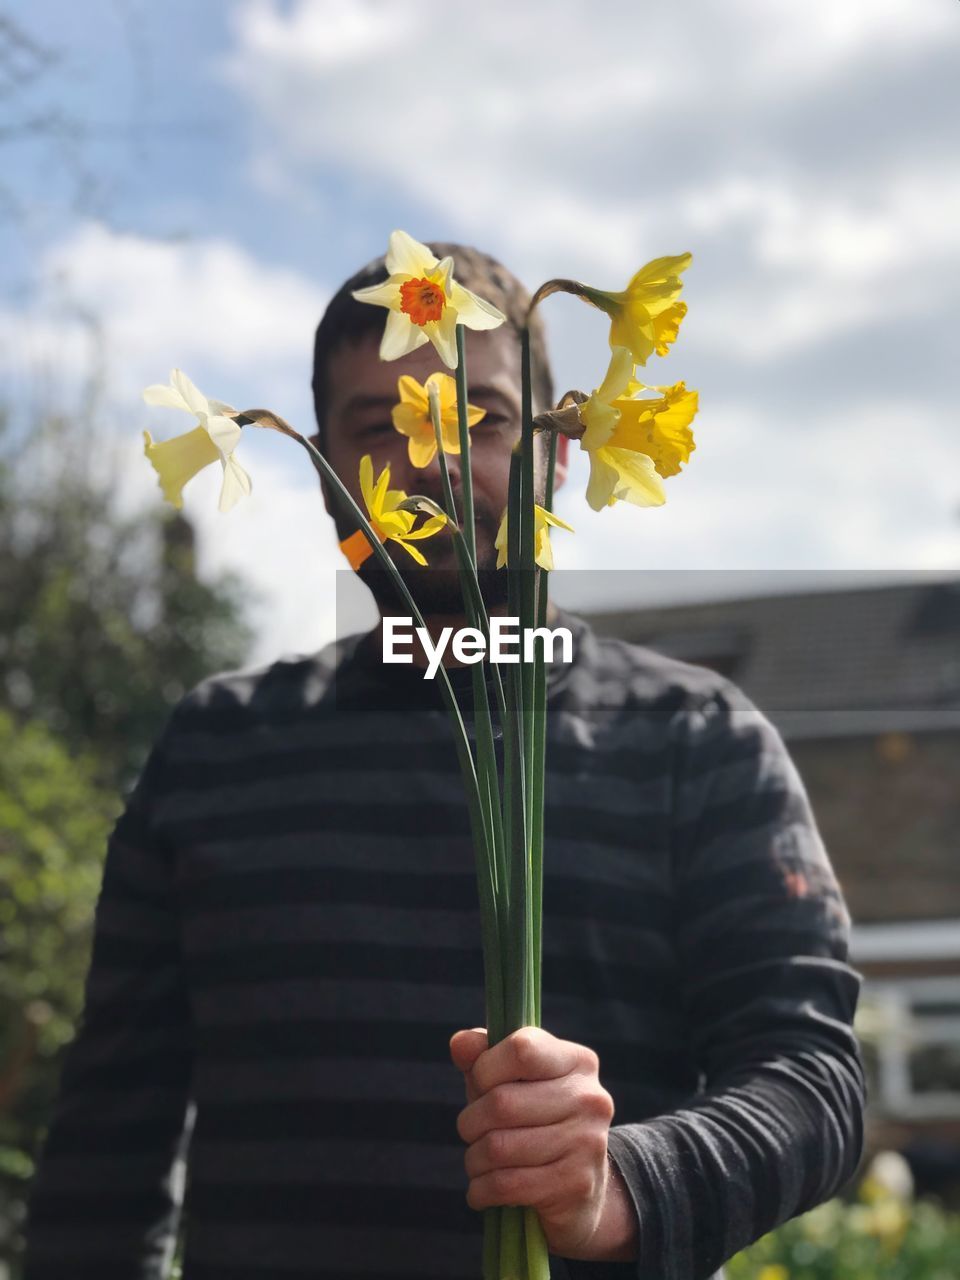 Low angle view of man holding yellow flowers against cloudy sky